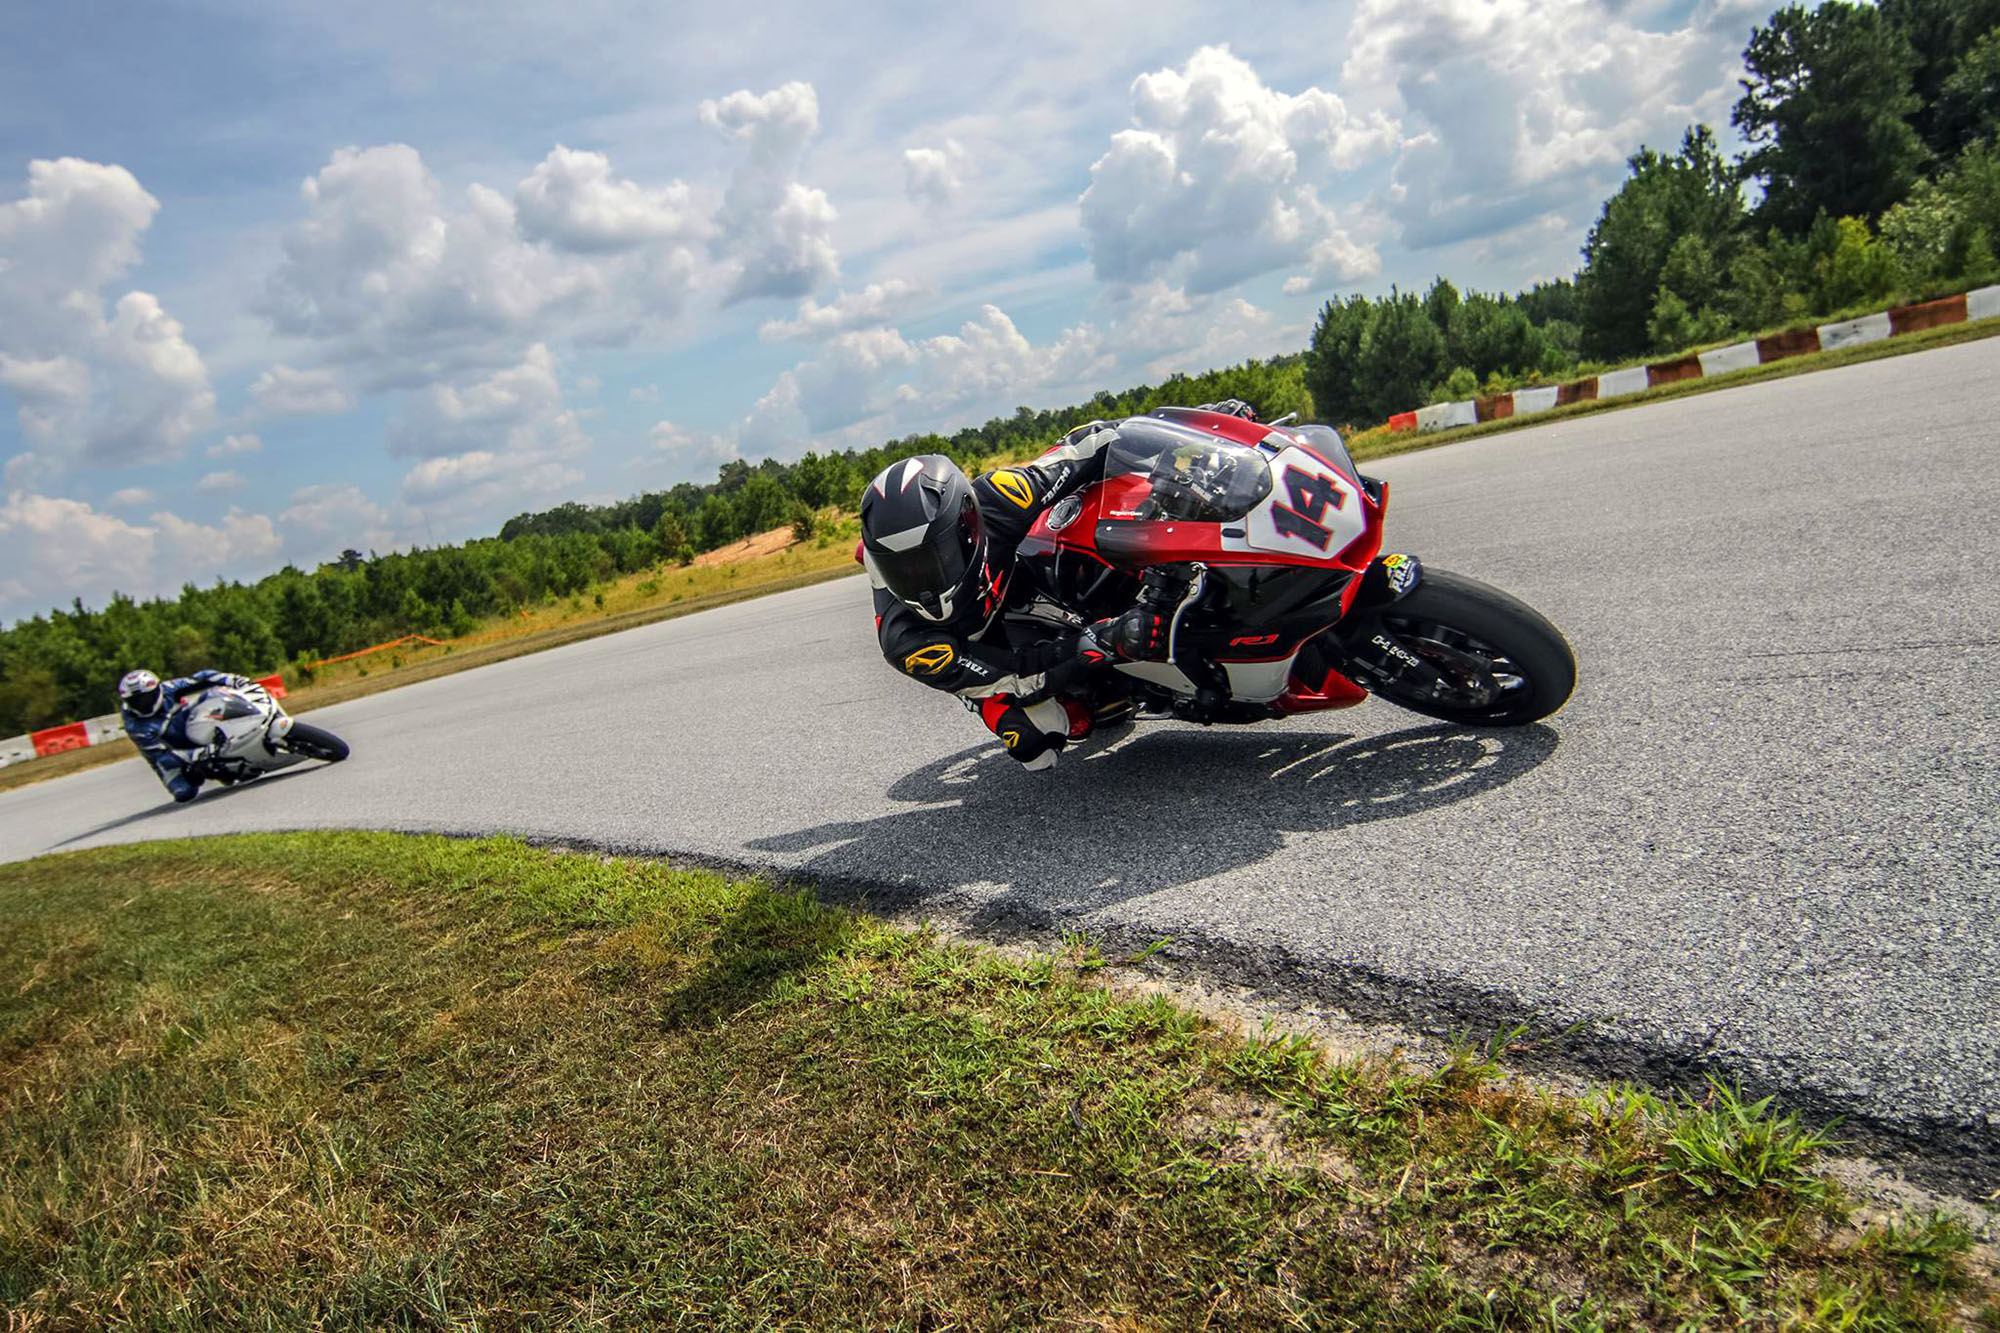 Get on track with PRE and ride your motorcycle the way it was meant to be ridden in the safer environment of the track.